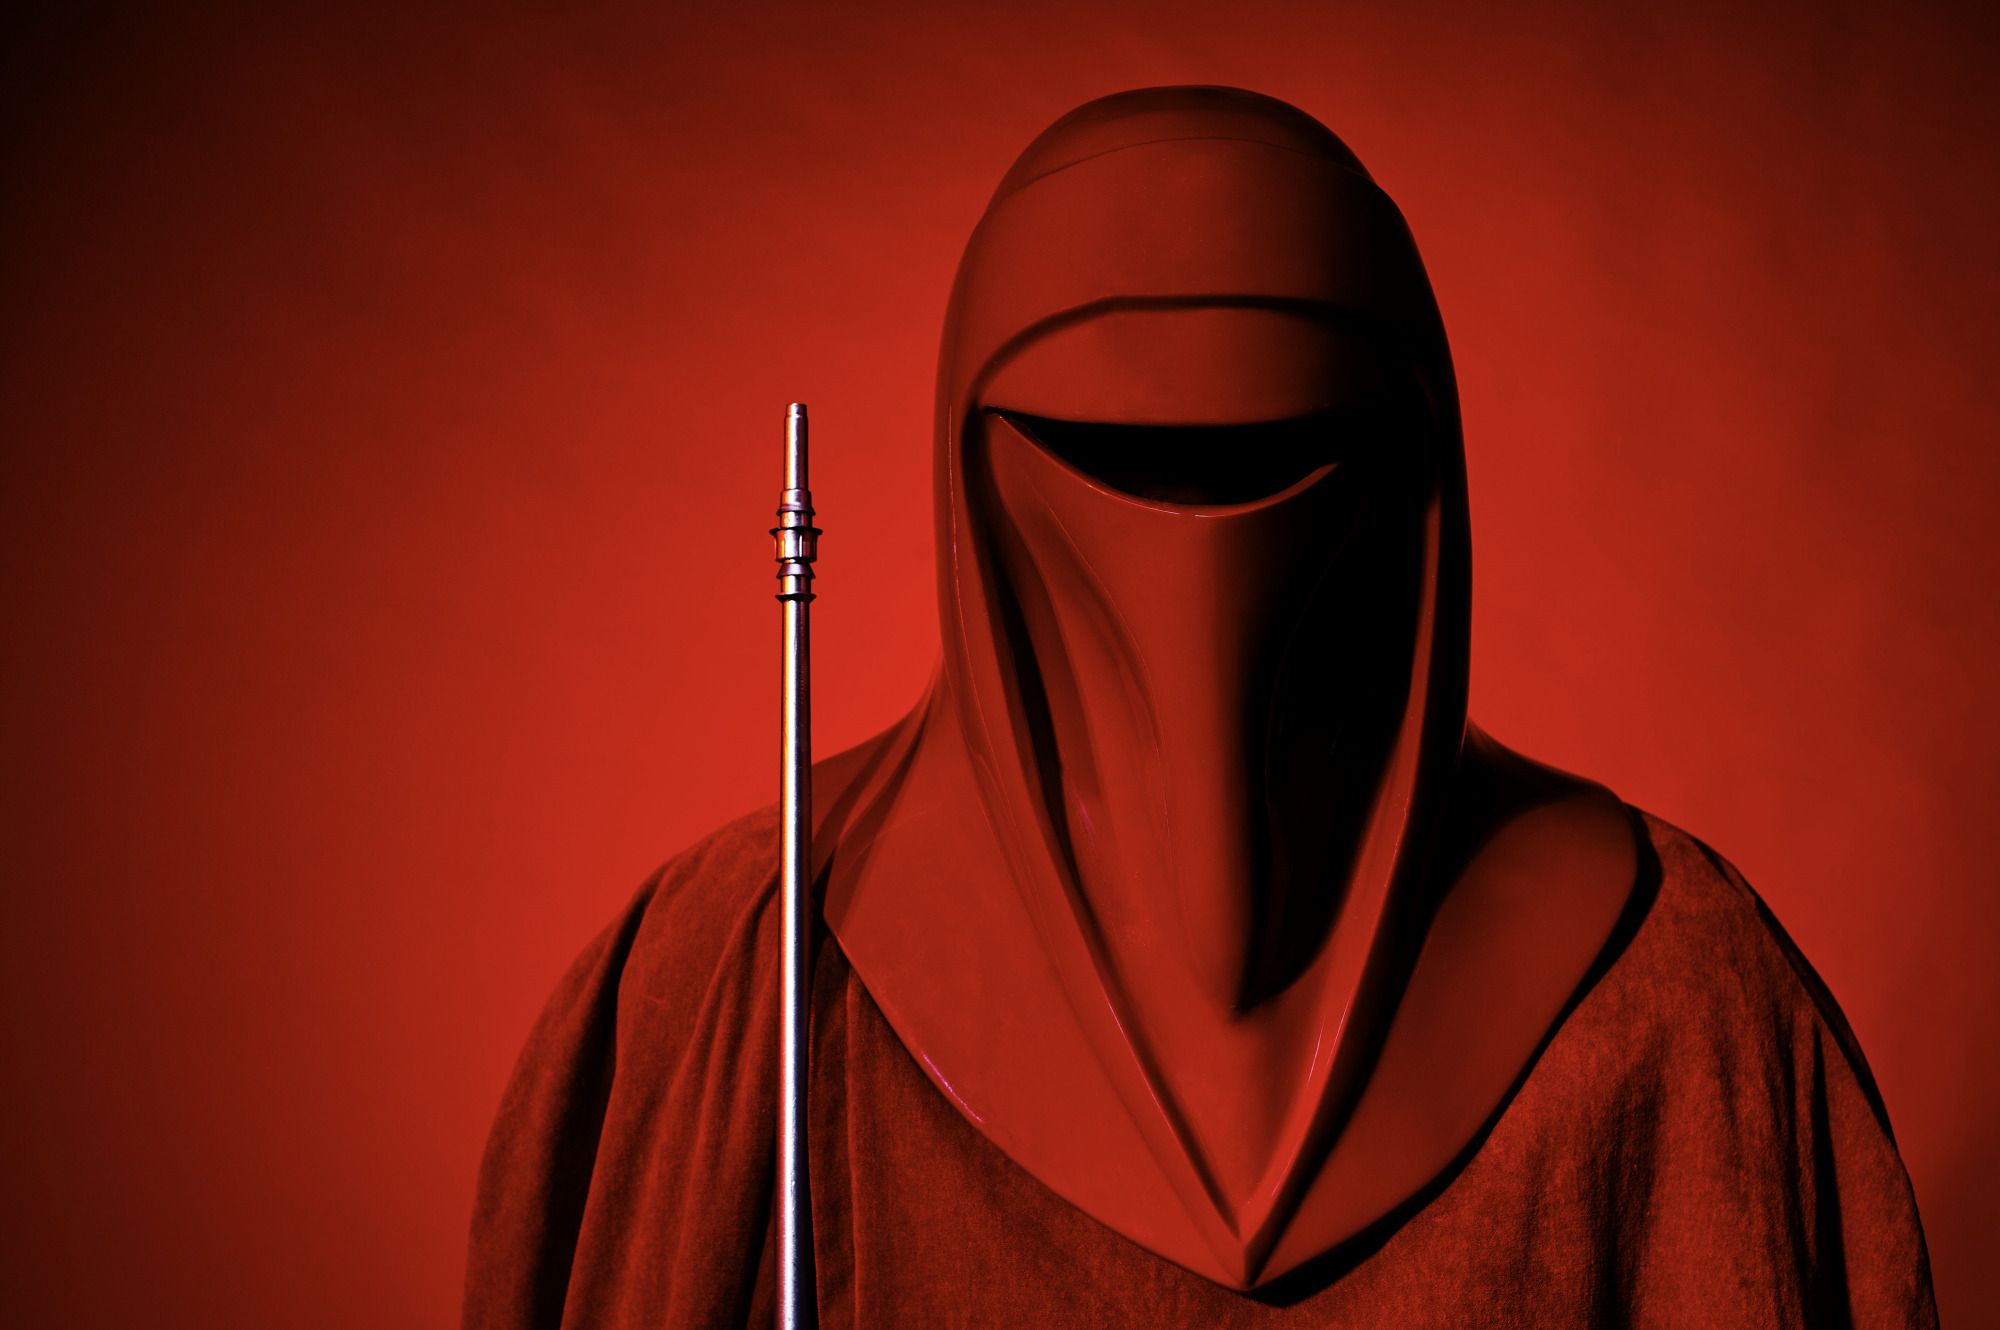 Star Wars Imperial Guard Cosplay Photo Workshops